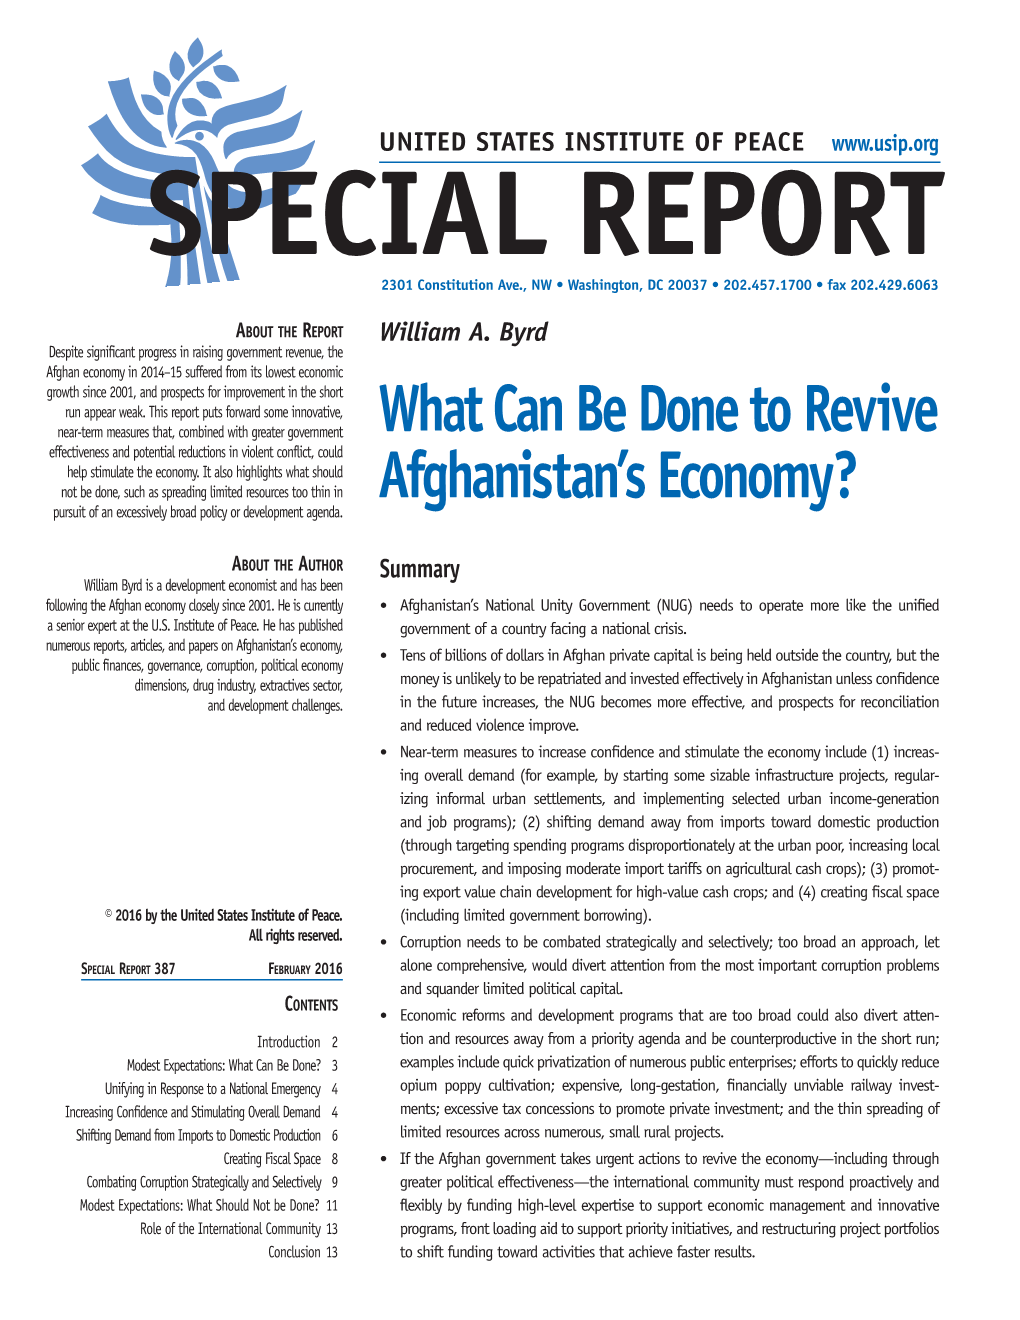 What Can Be Done to Revive Afghanistan's Economy?